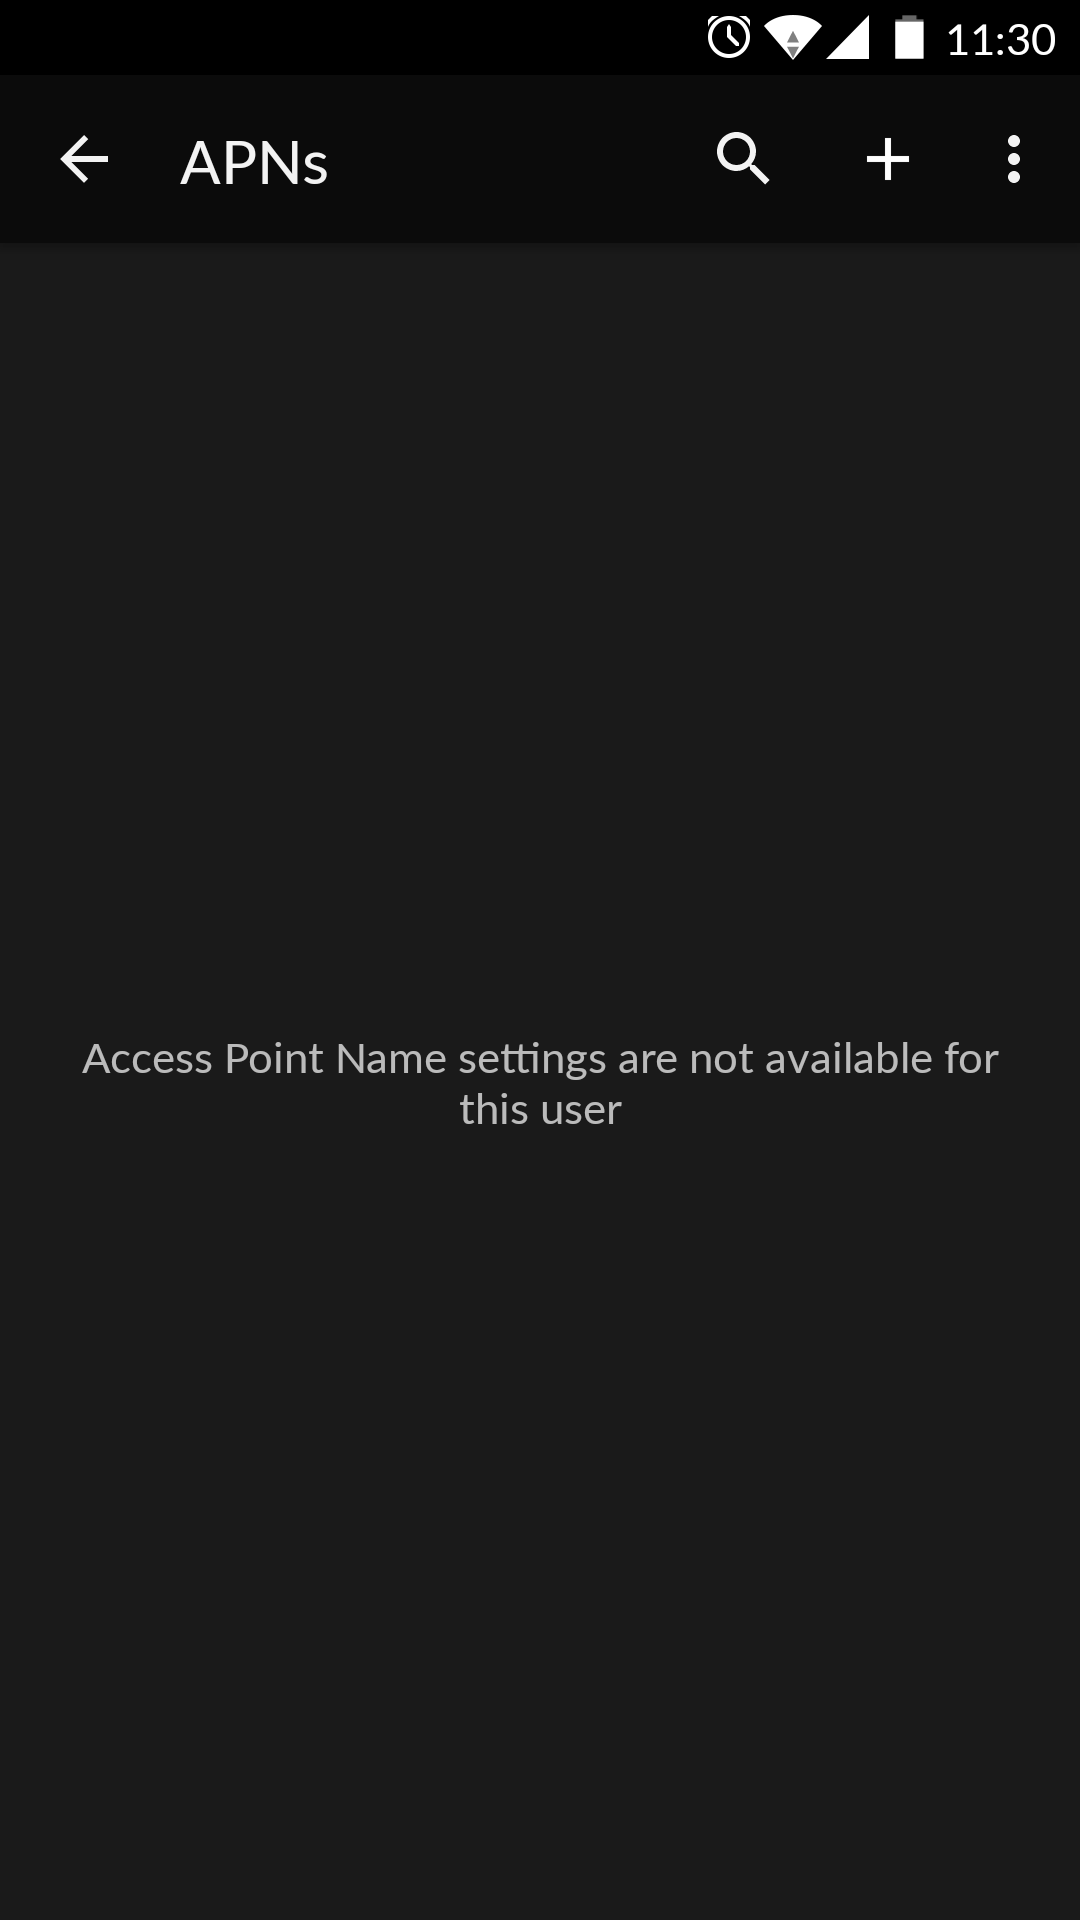 Access Point Name settings are not available for this user